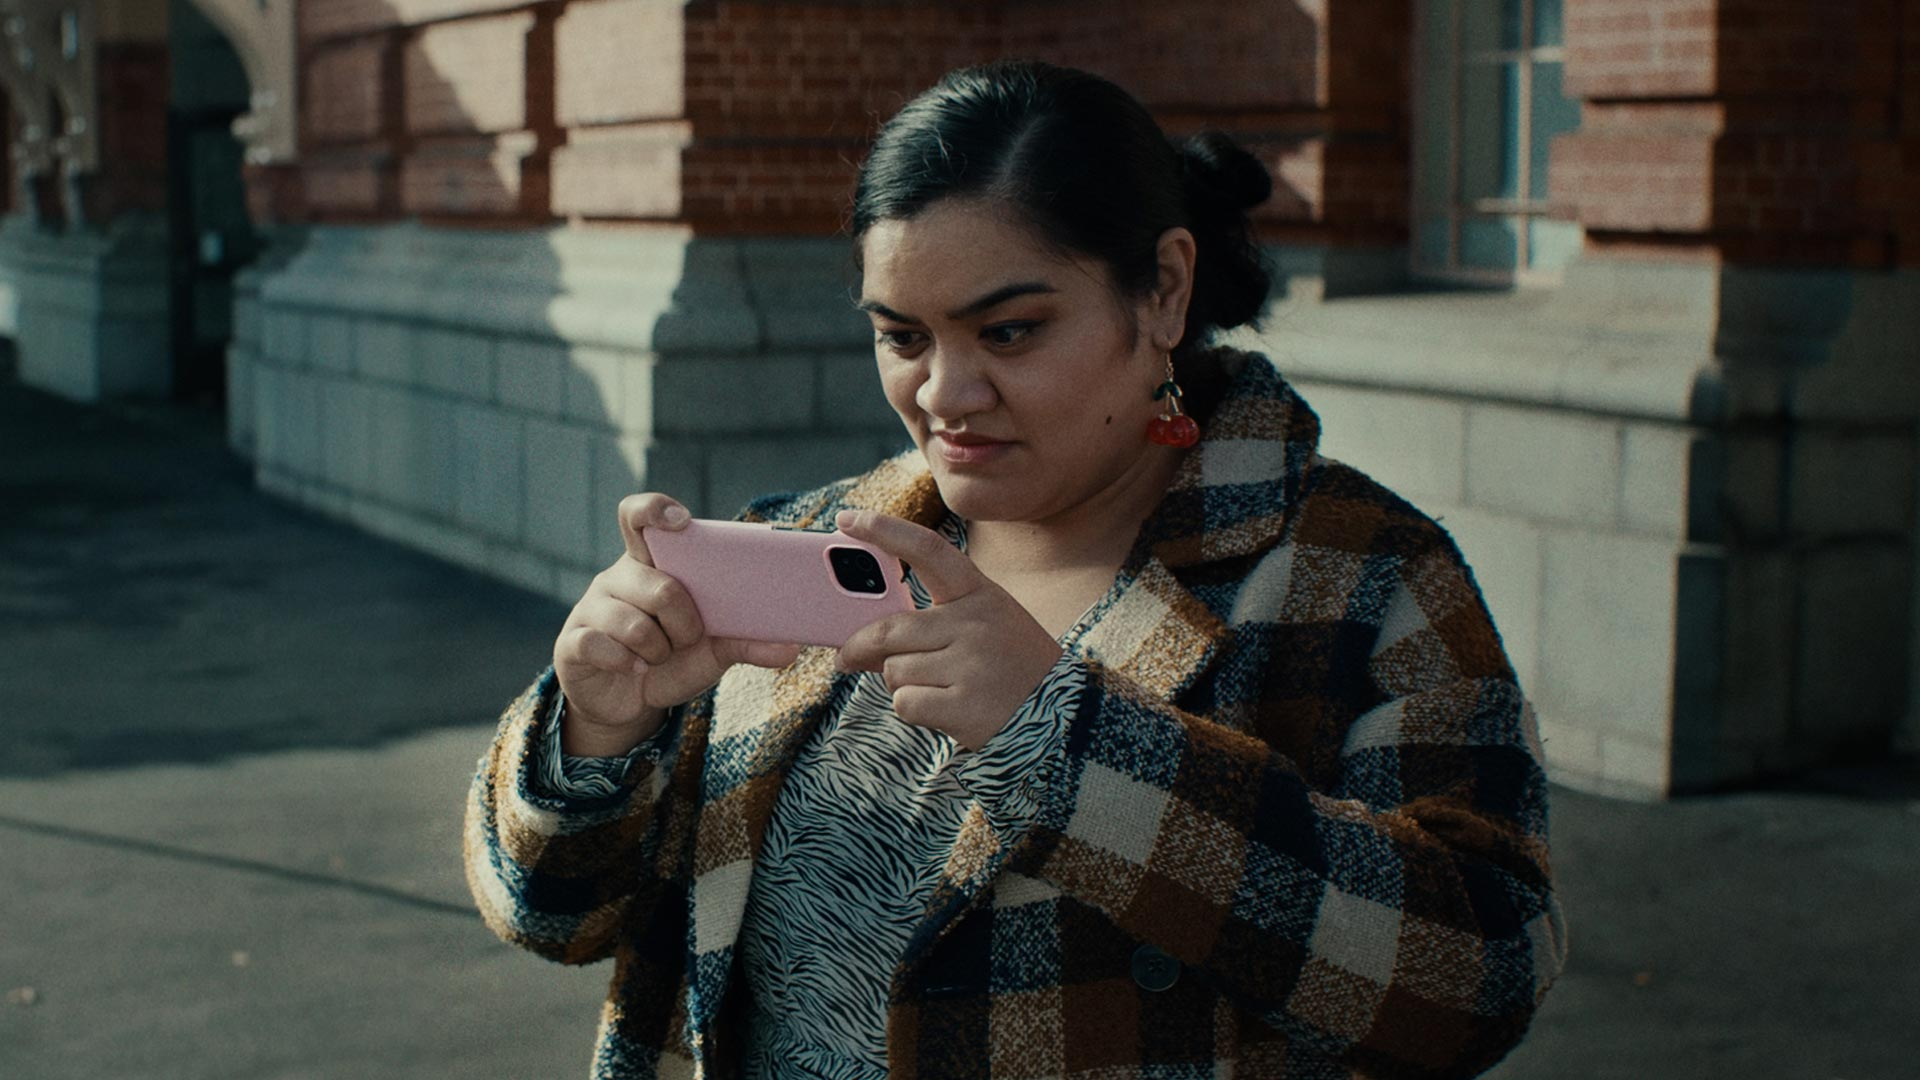 TVNZ Movie Still of Woman taking picture with I-phone